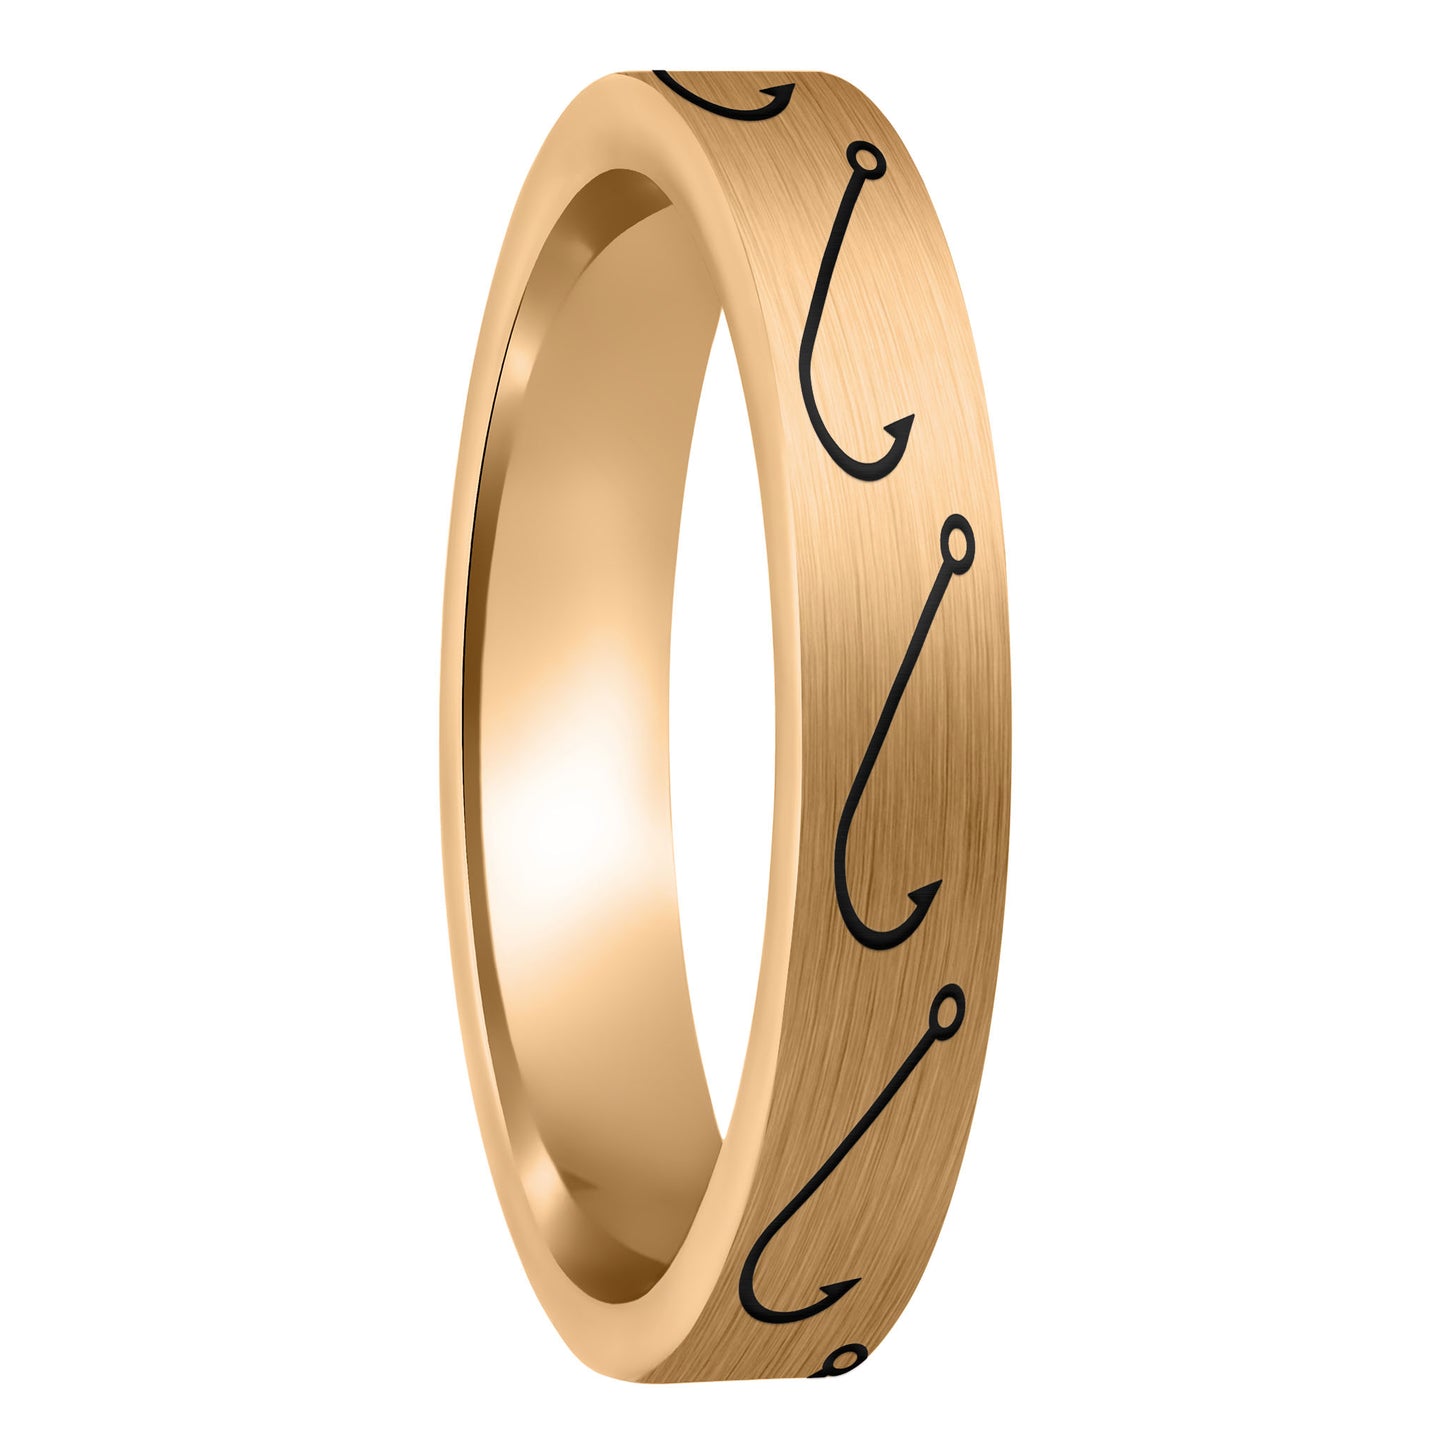 A simple fishing hook brushed rose gold tungsten women's wedding band displayed on a plain white background.